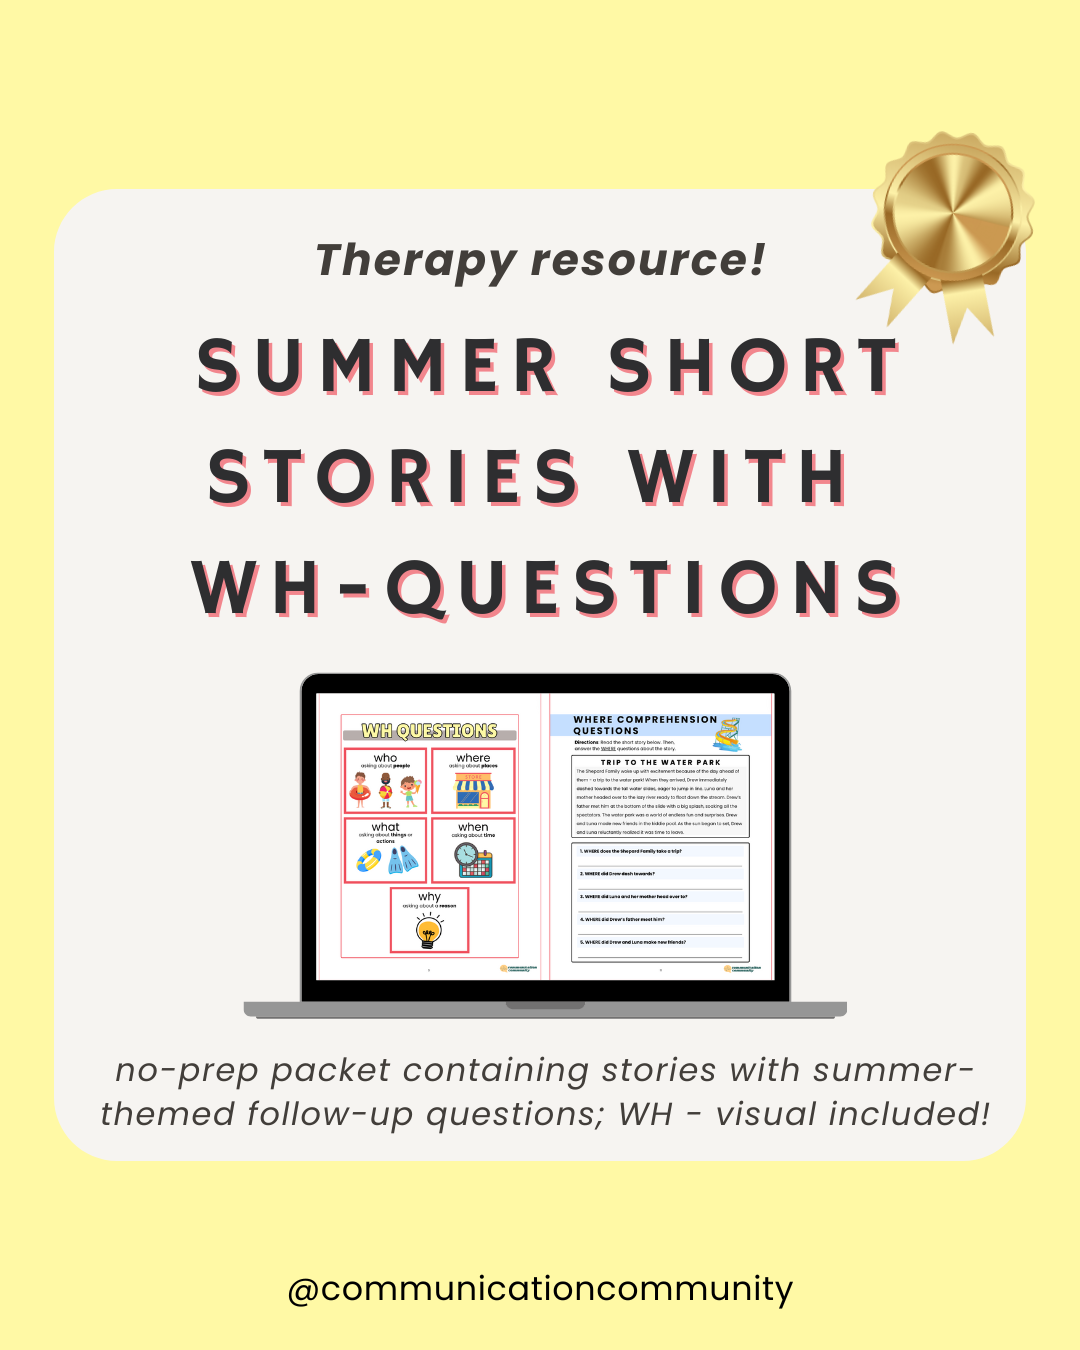 Summer Short Stories with WH Comprehension Questions for ELA/Speech Therapy